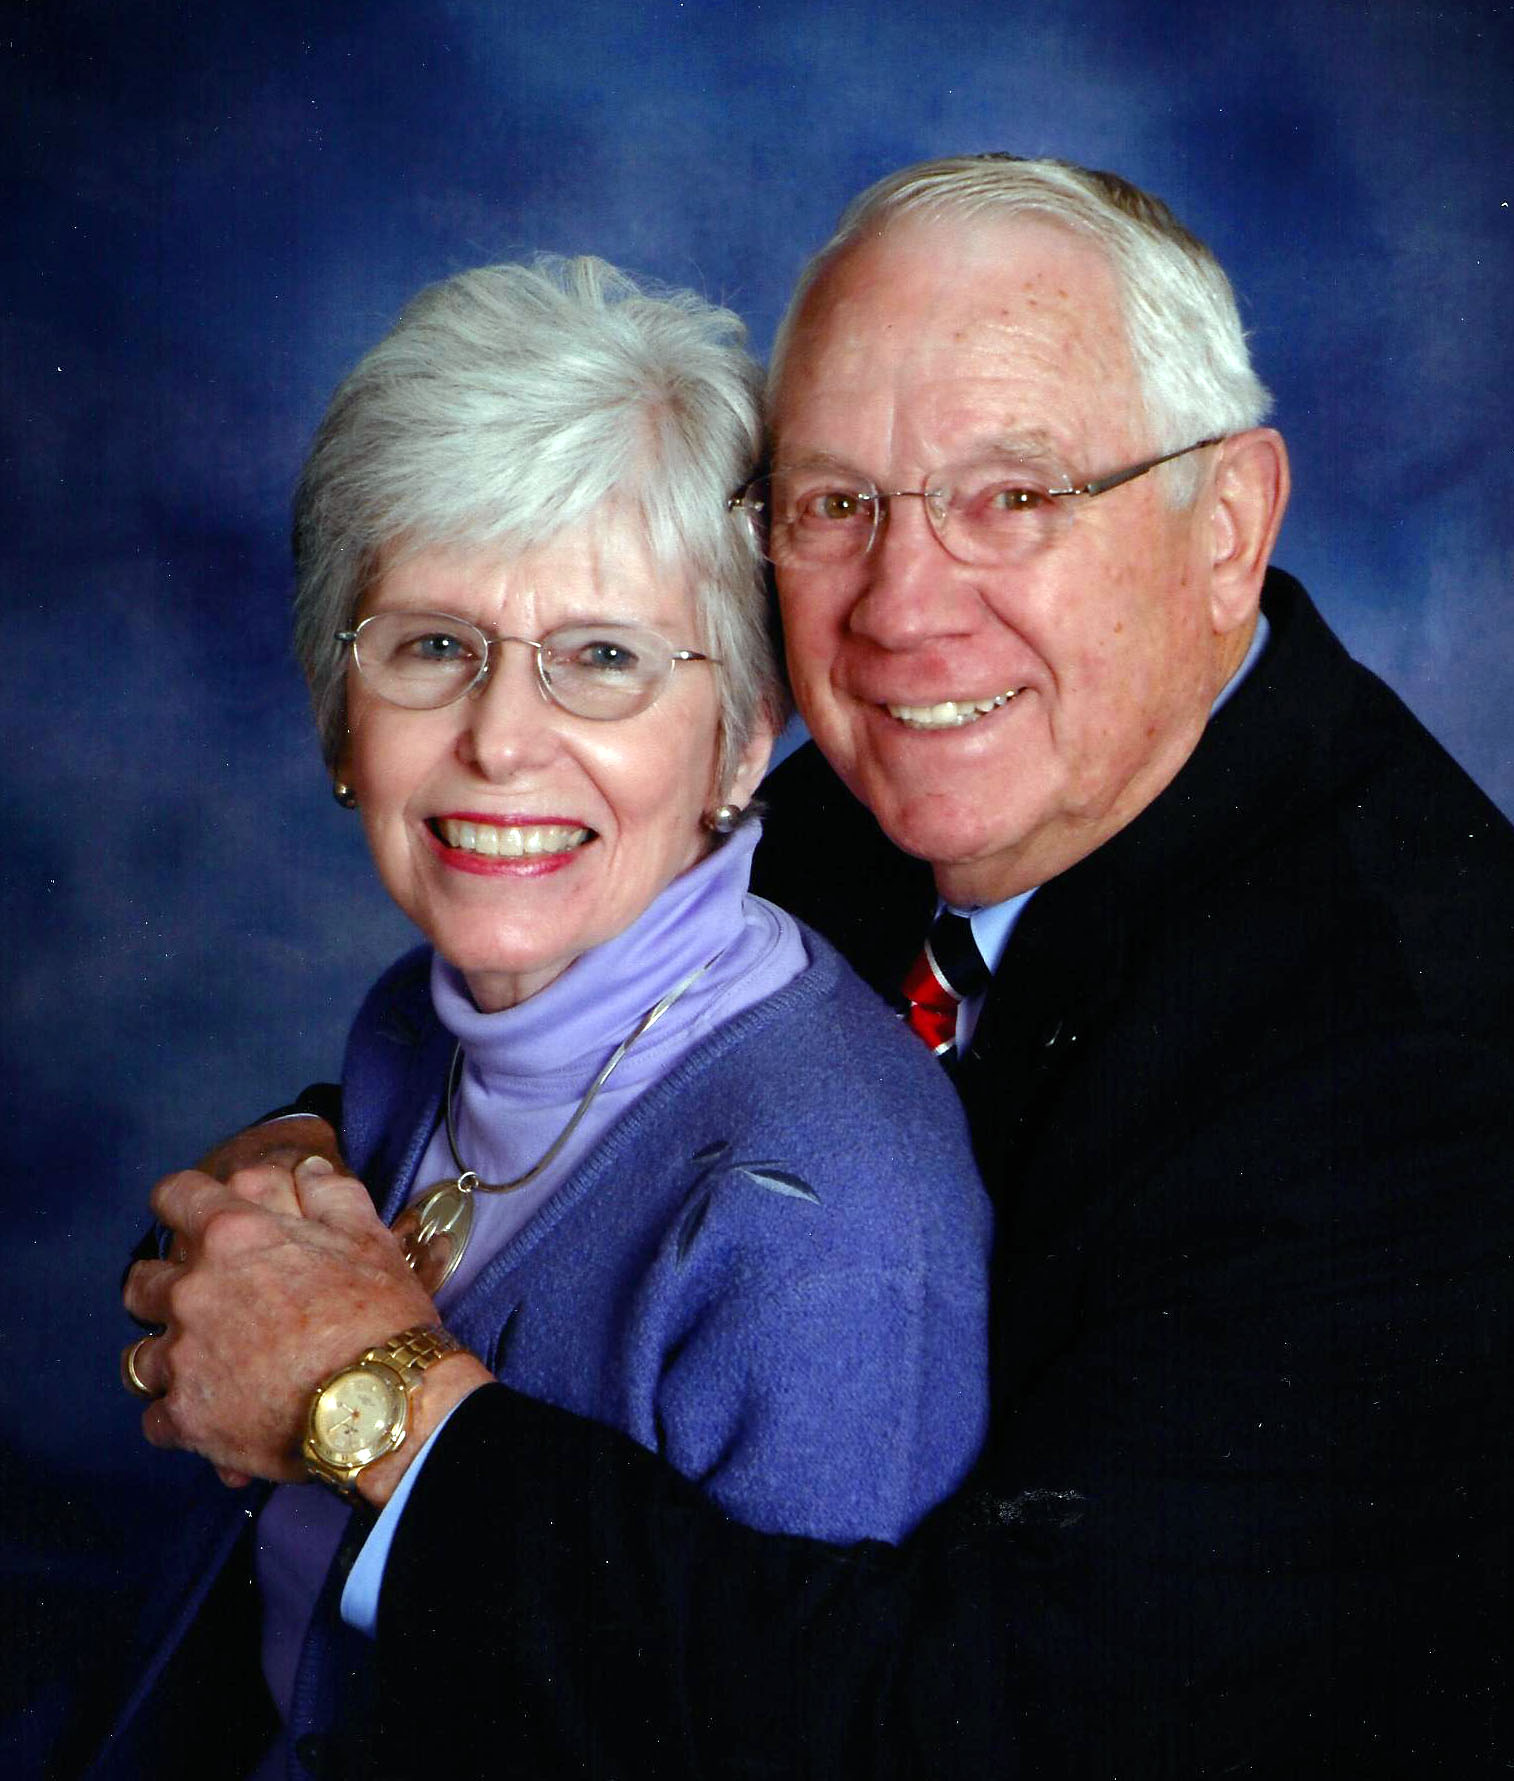 Donor: William and Nancy Law